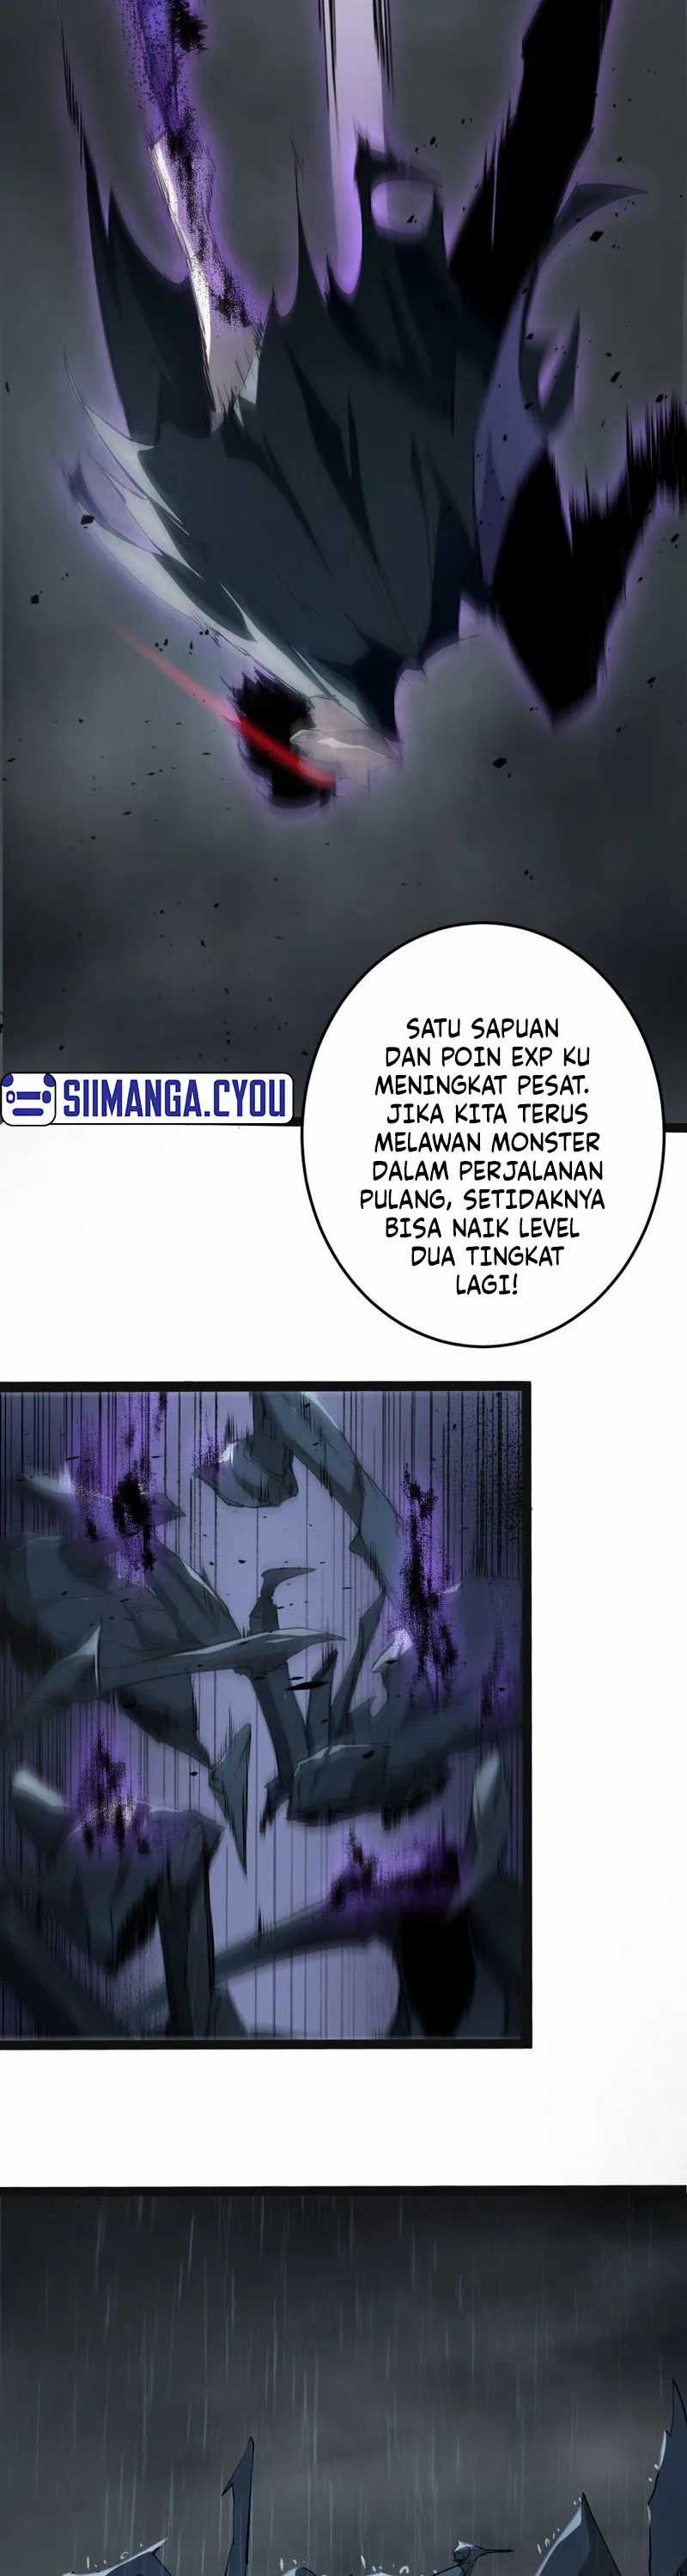 Overlord of Insects Chapter 05